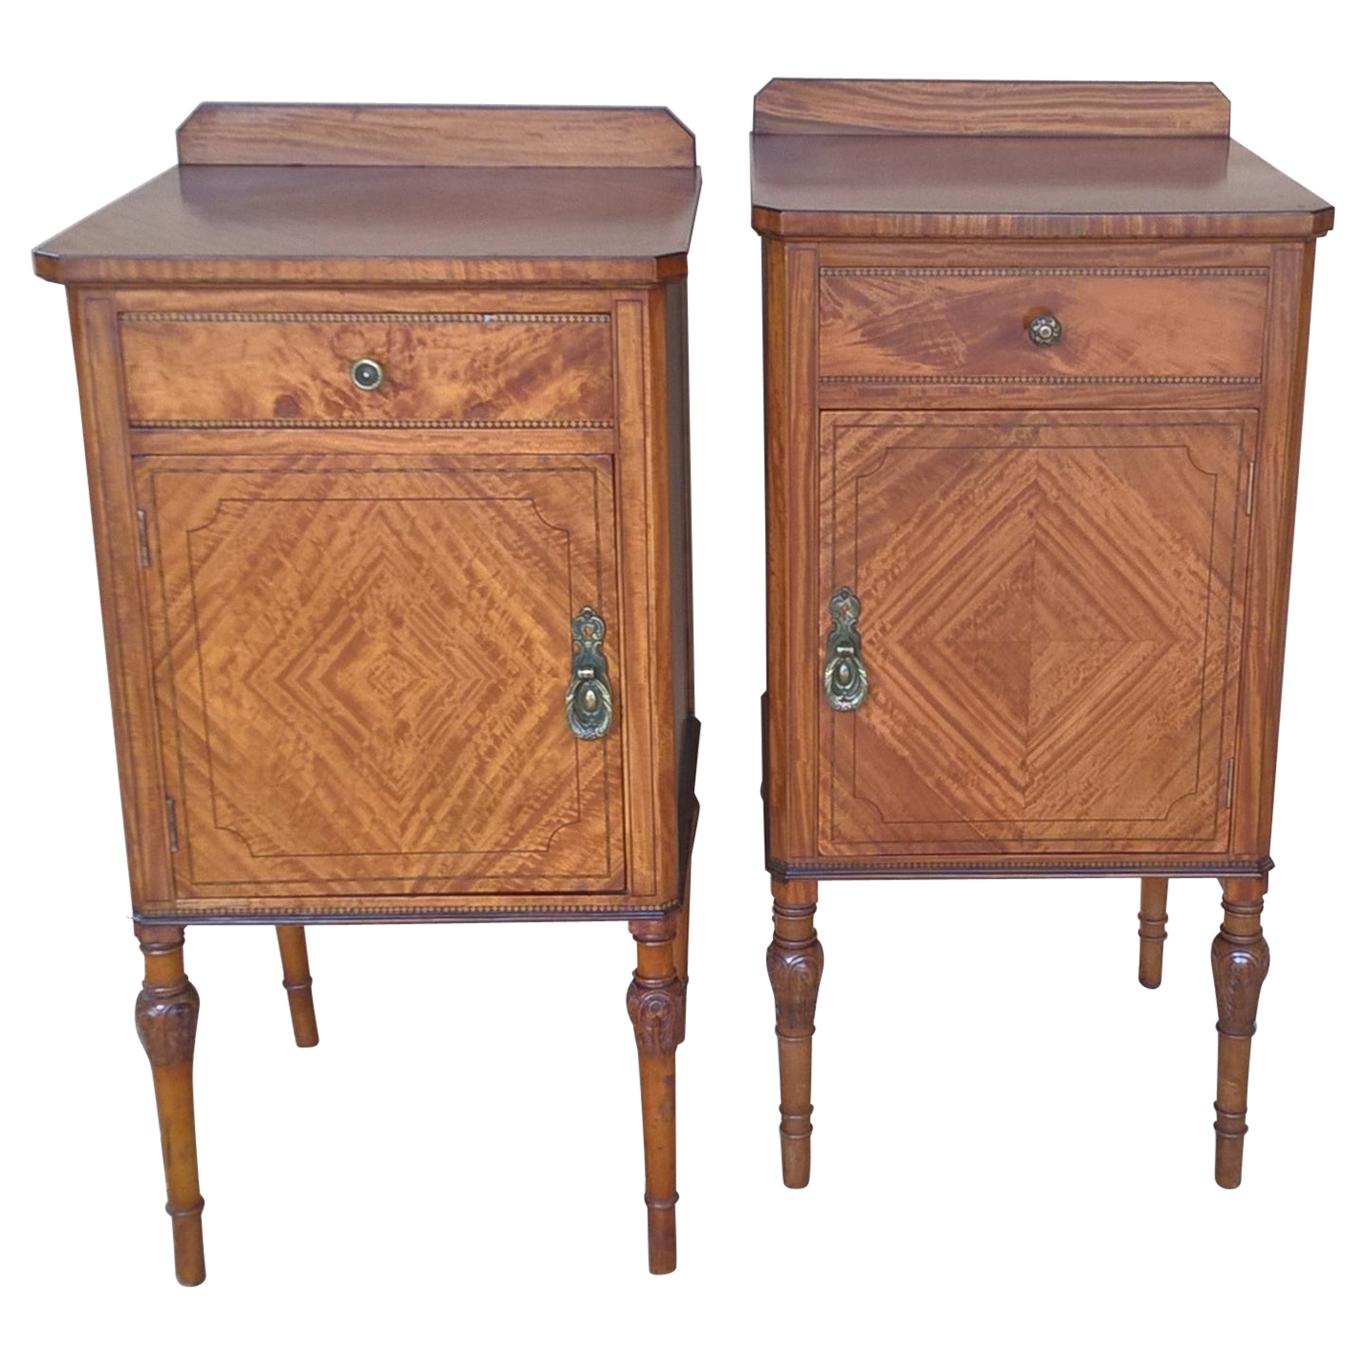 Near Matched Pair of Edwardian Satinwood Bedside Cabinets For Sale